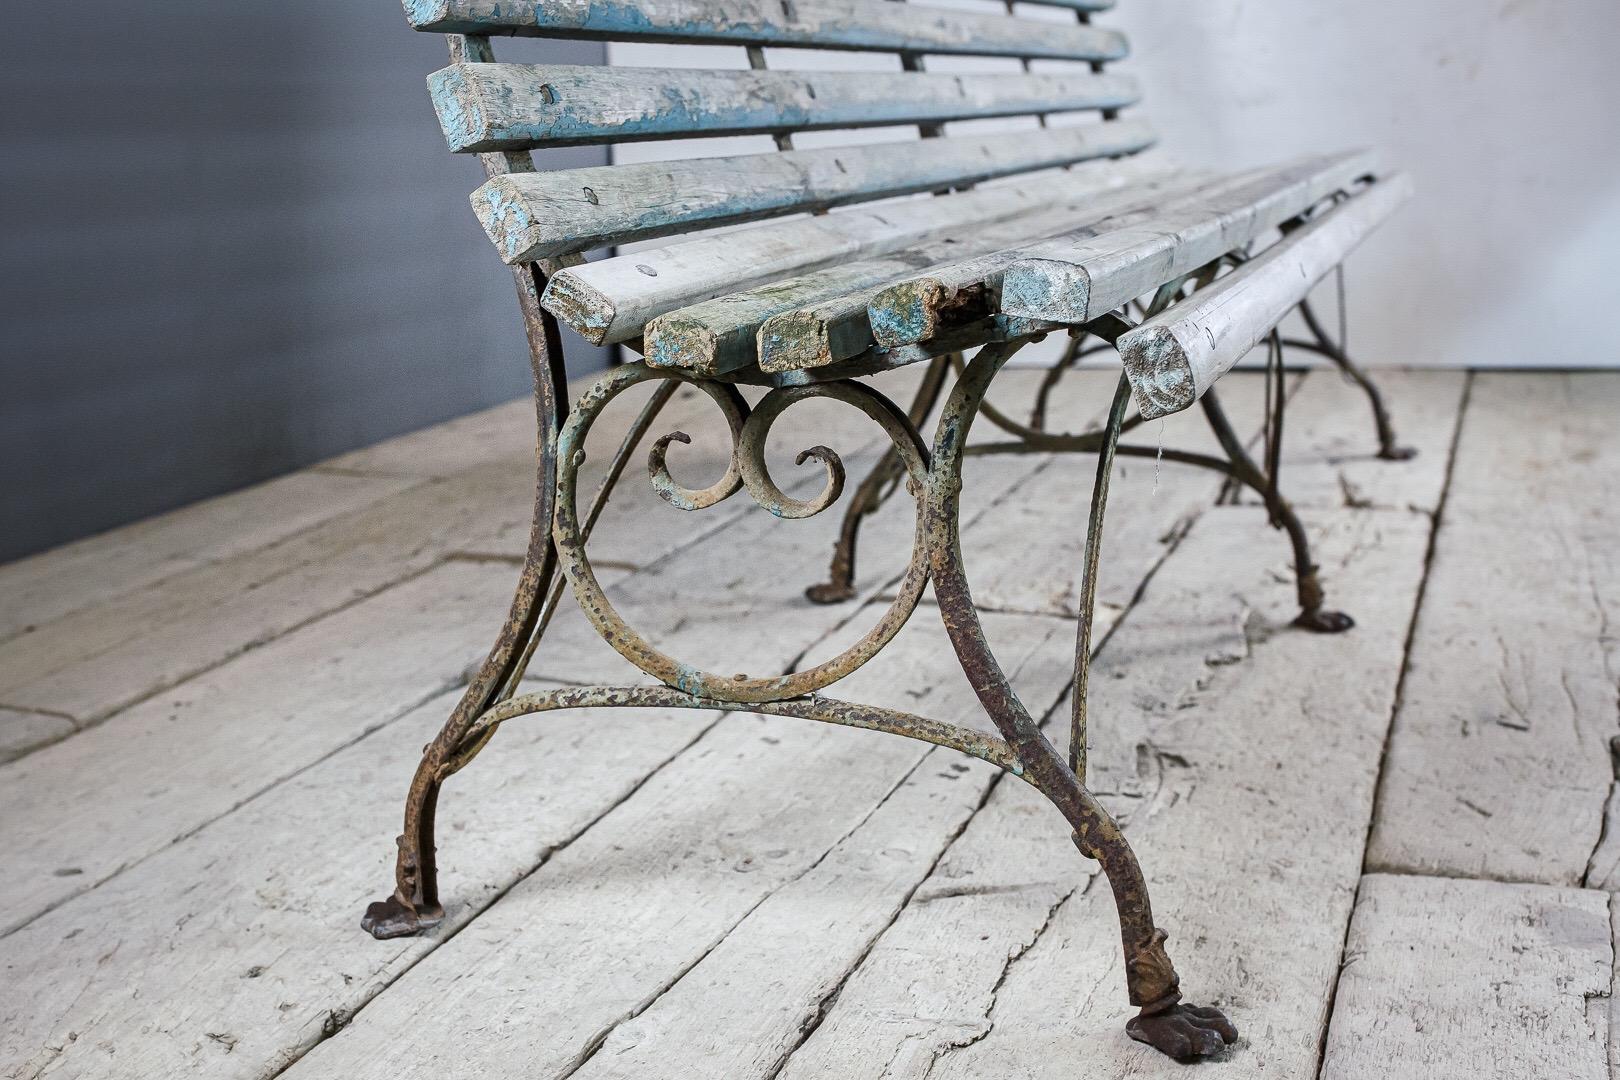 Late 19th century large Arras garden or conservatory bench, sculptural wrought and cast iron 6 legged base. Earlier lion paw feet model. Unusual wood slat model, solid and sturdy with historic paint. Wonderfully sculptural, dry original surface.